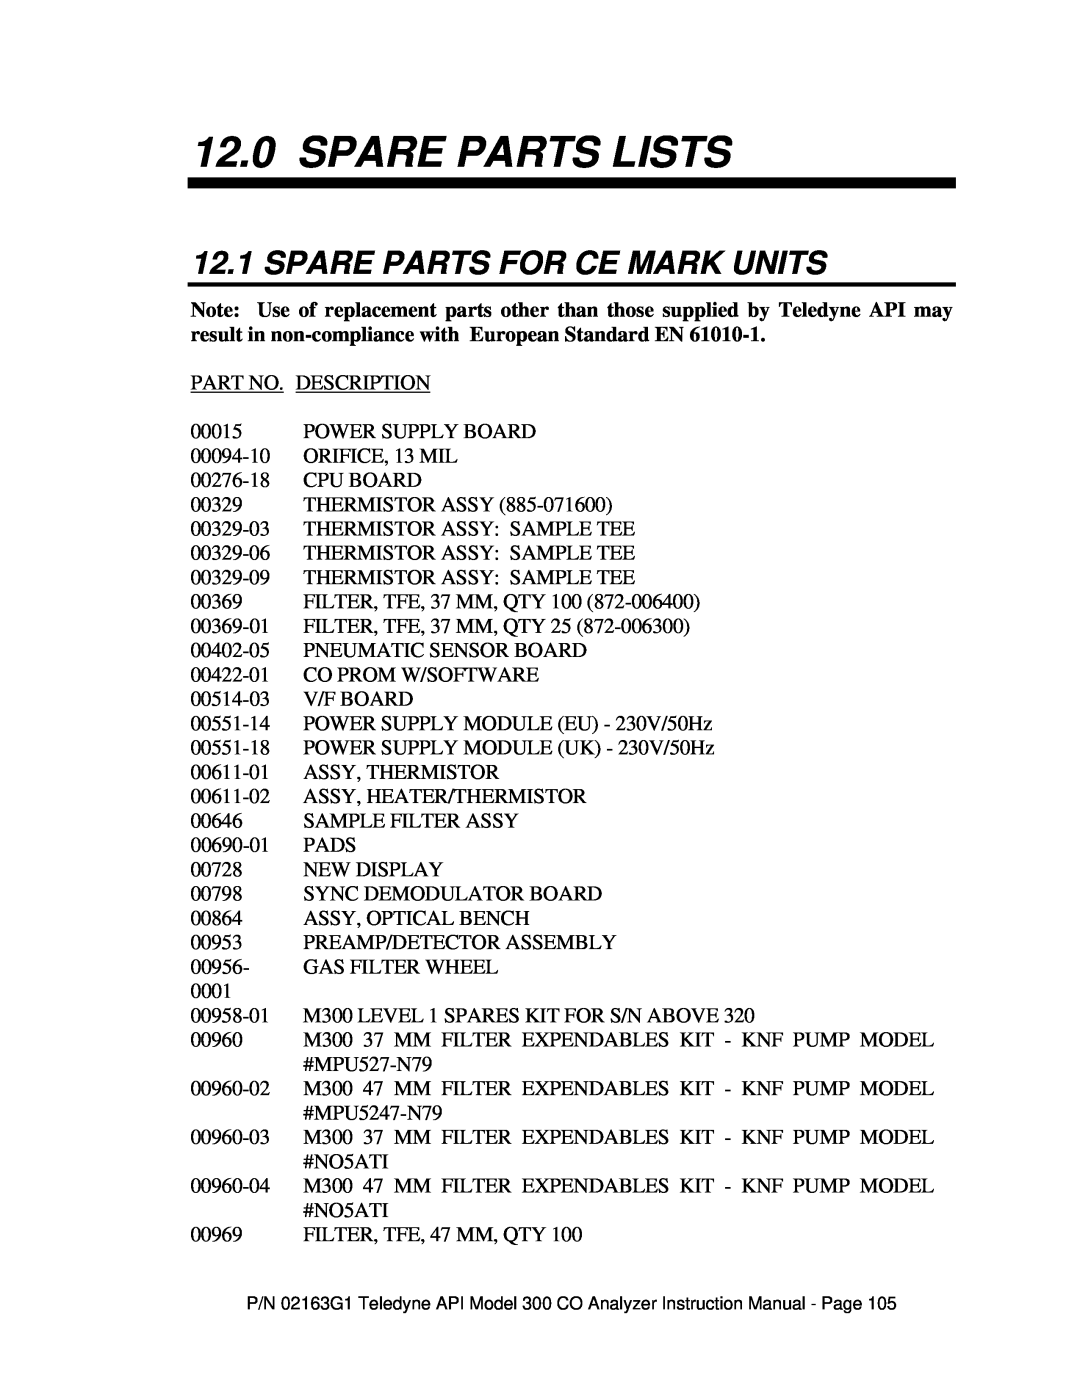 Teledyne 300 instruction manual 12.0SPARE PARTS LISTS, 12.1SPARE PARTS FOR CE MARK UNITS 